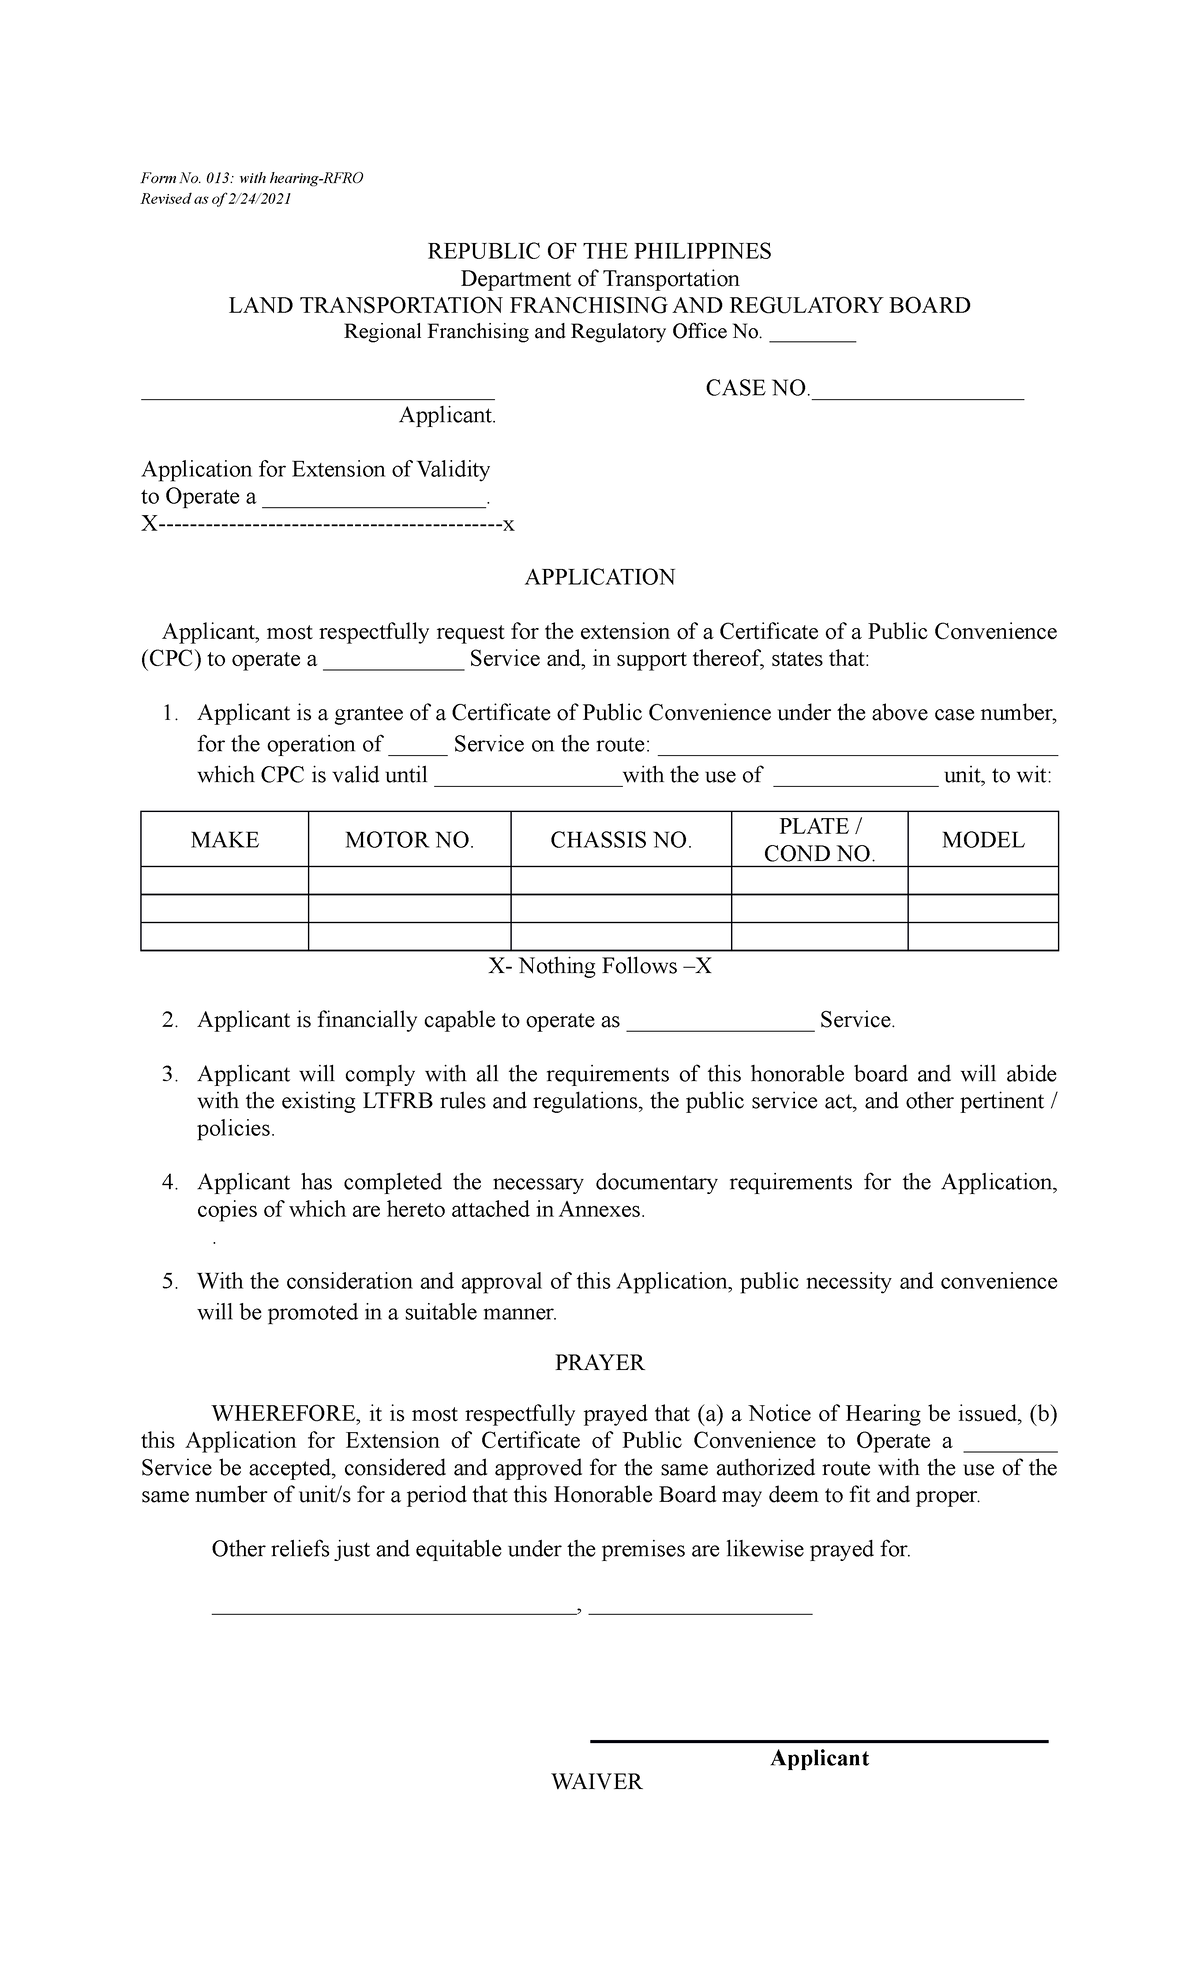 Rfro Application Extension Of Validity Form No 013 With Hearing Rfro Revised As Of 224 9191